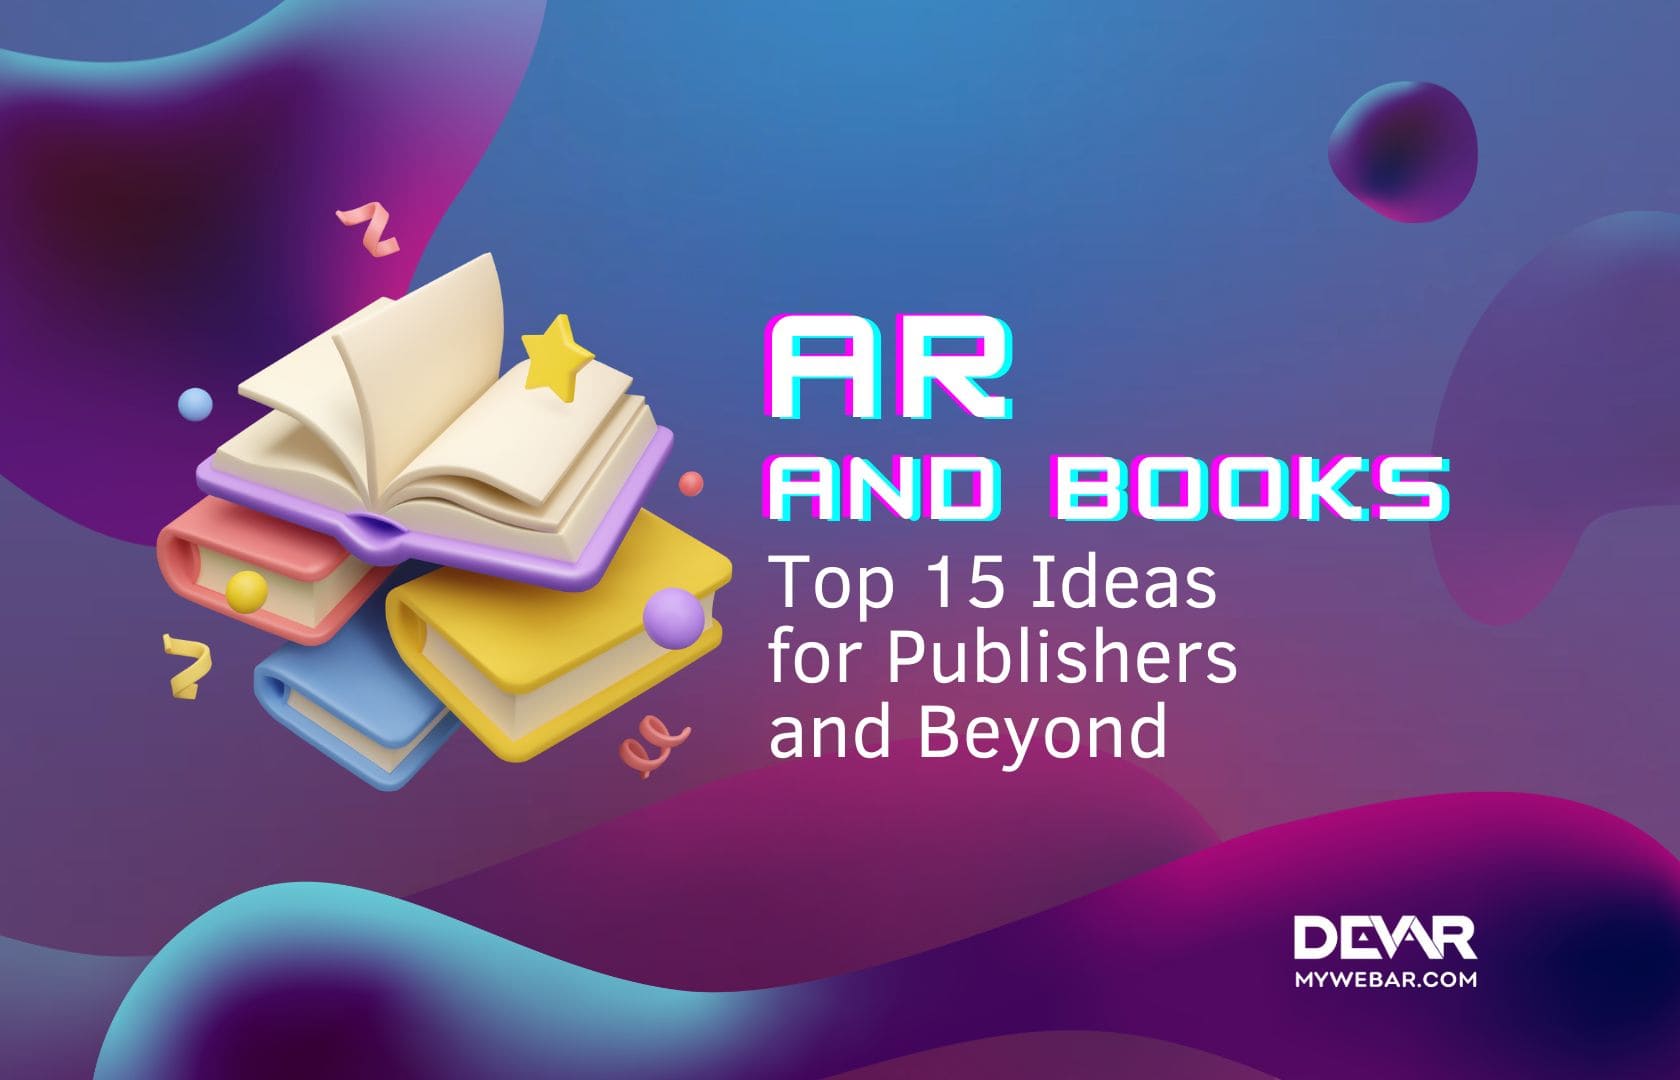 AR and Books Top 15 Ideas for Publishers and Beyond